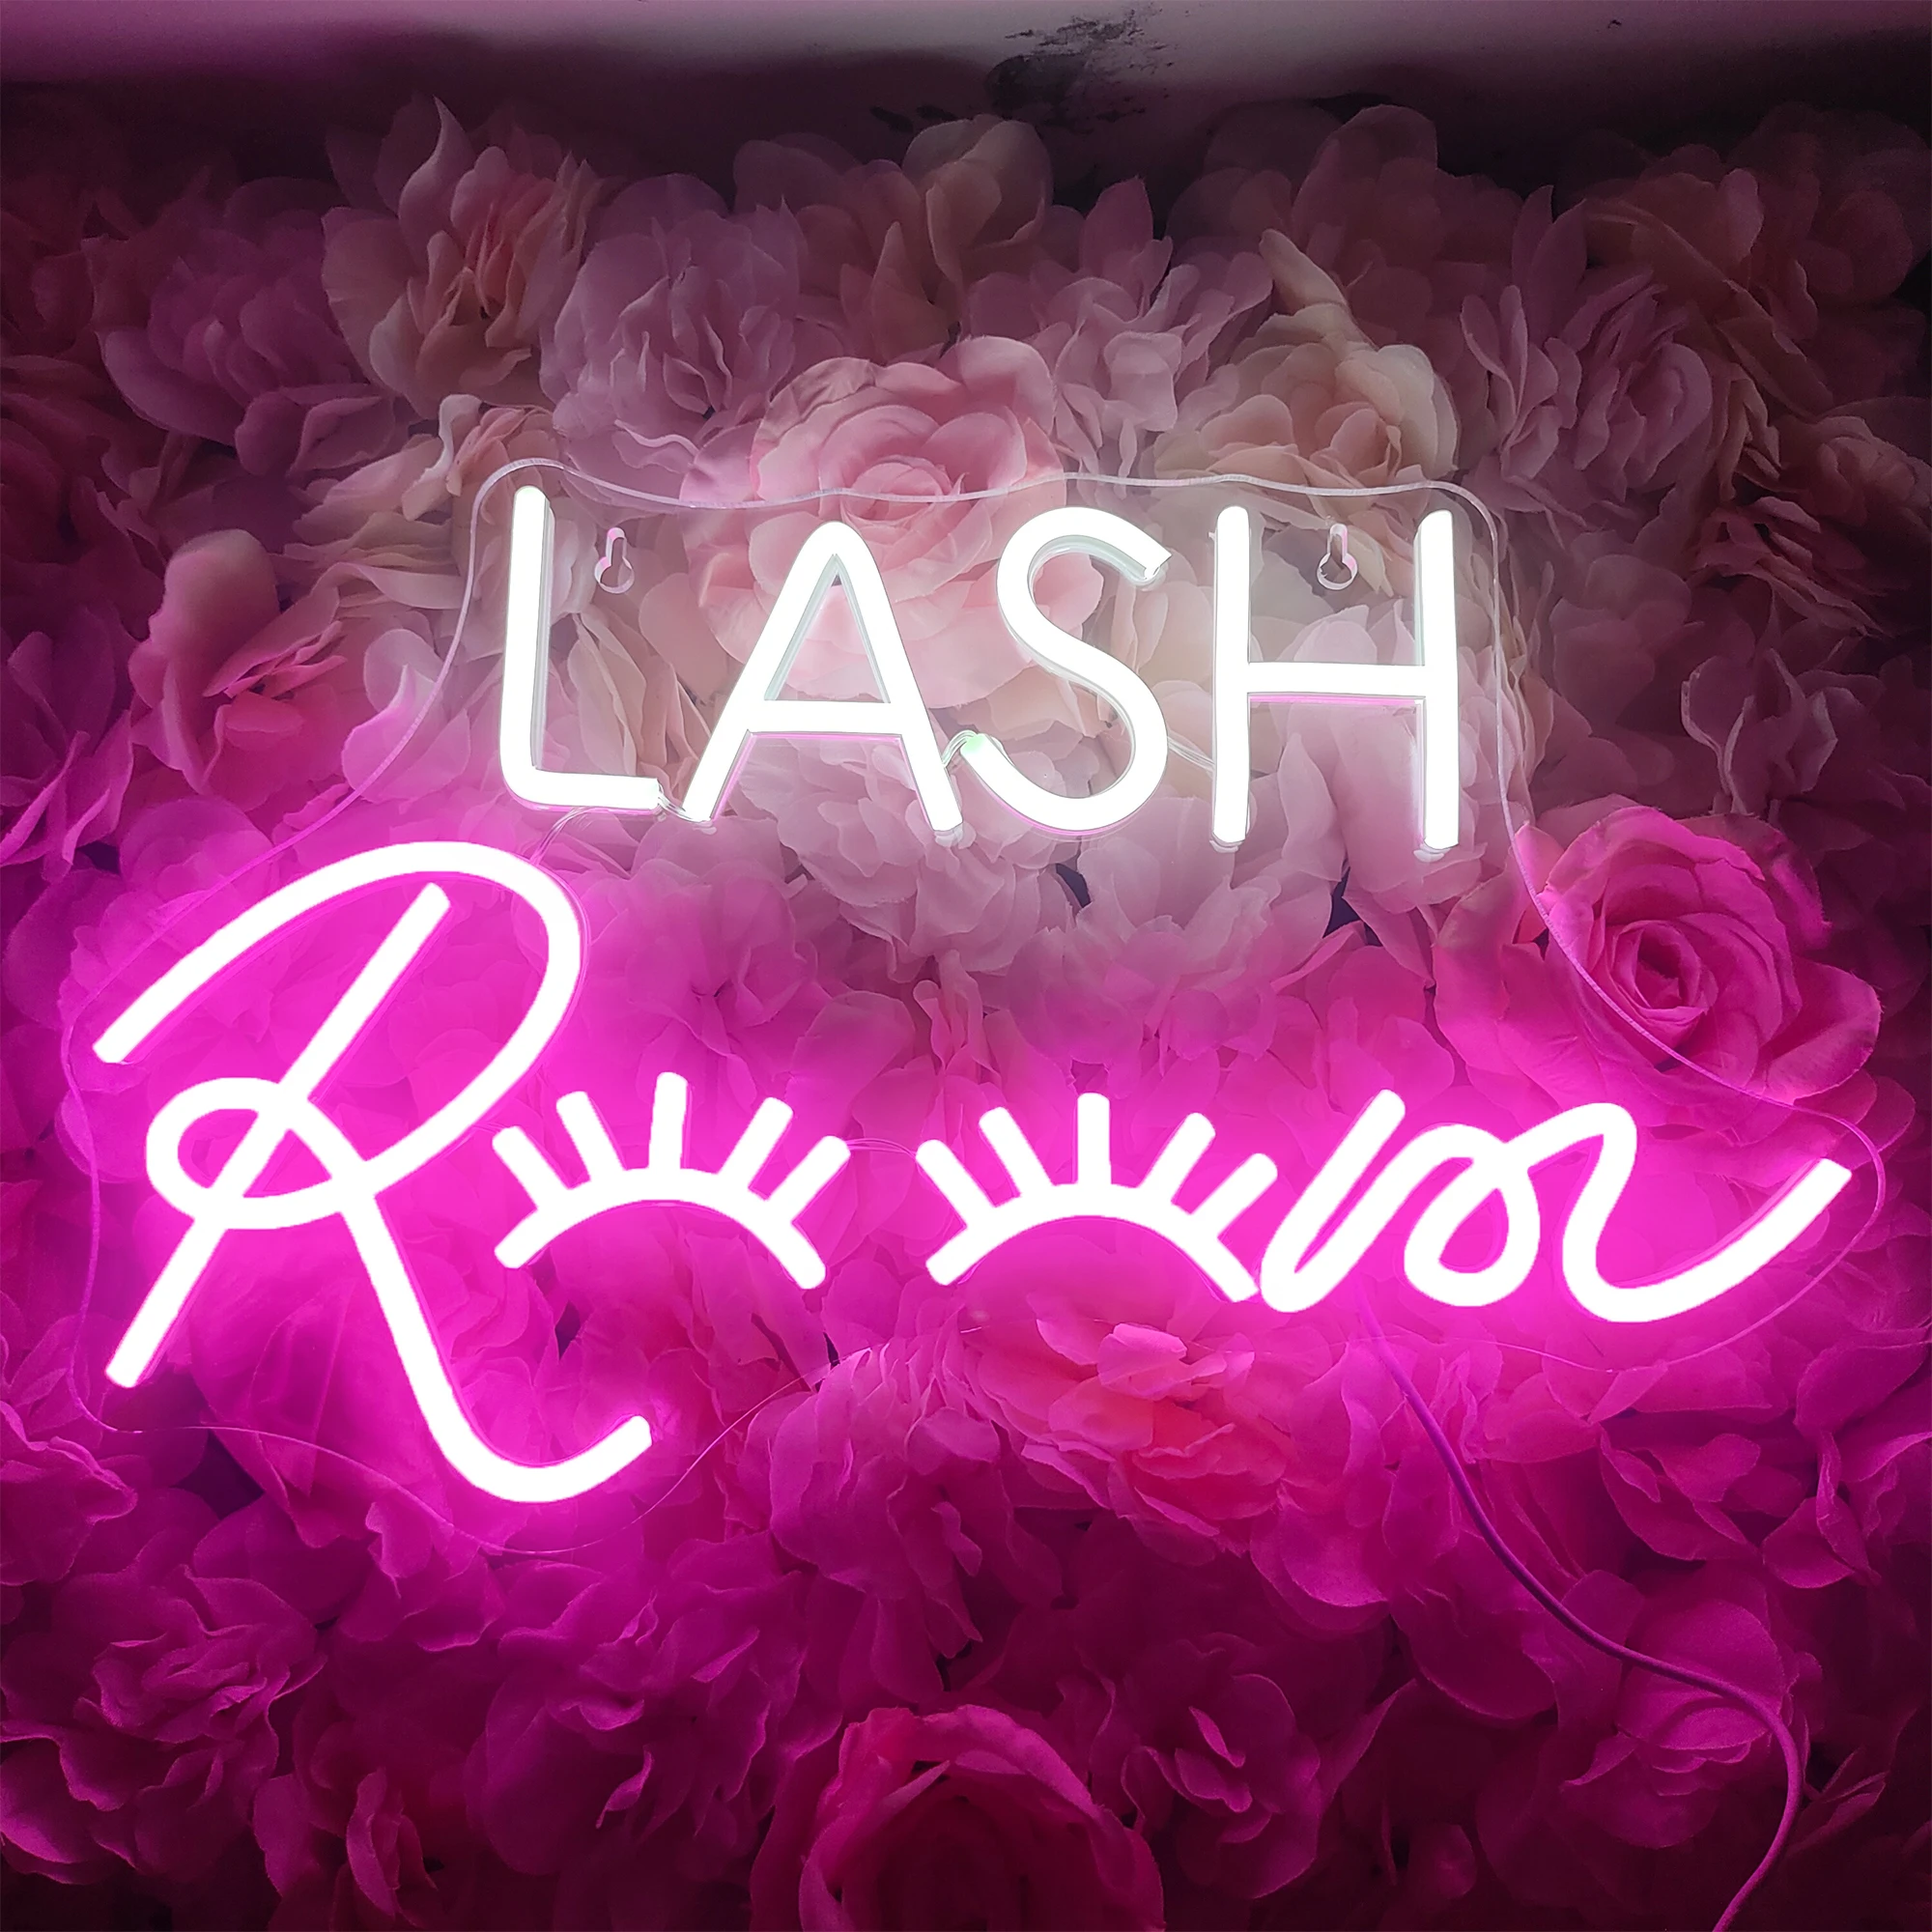 LED Neon Sign Lights LASH Room Decoration Wall Art Neon Light Beauty Salon Decor Pink Neon LED Sign Business Signboard LED Light wanxing hair salon led neon sign lights barbershop acrylic hanging party clup aesthetic room home barber shop wall decoration